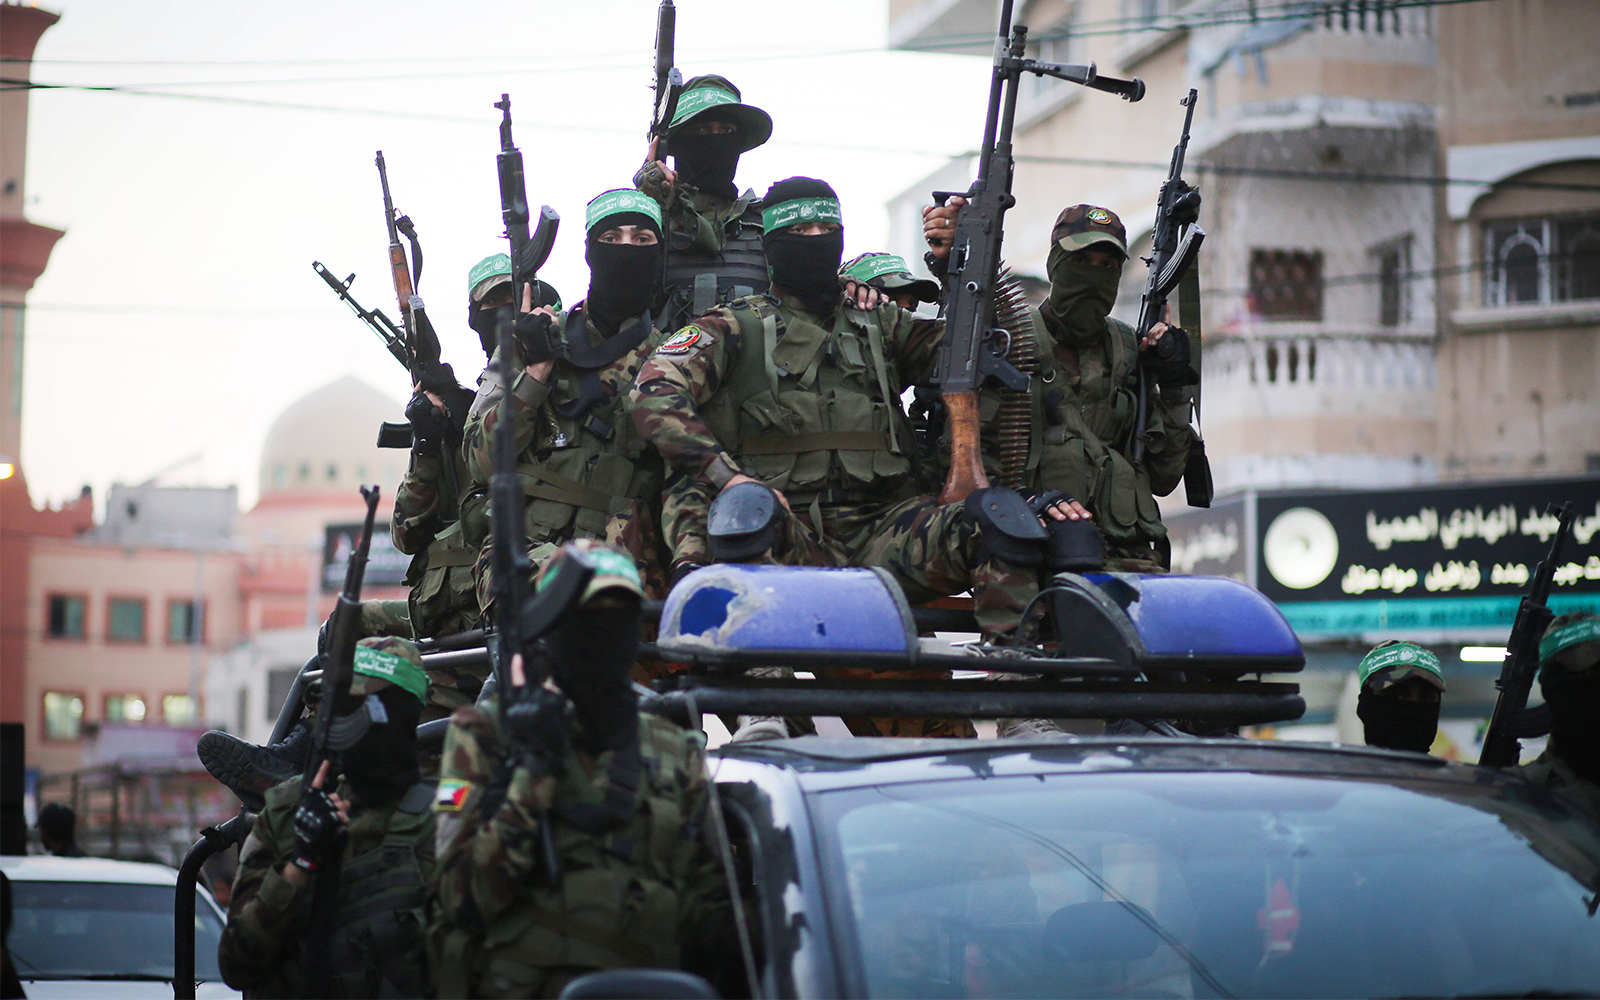 Hamas leader vows to shower Israel with missiles if IDF invades Gaza